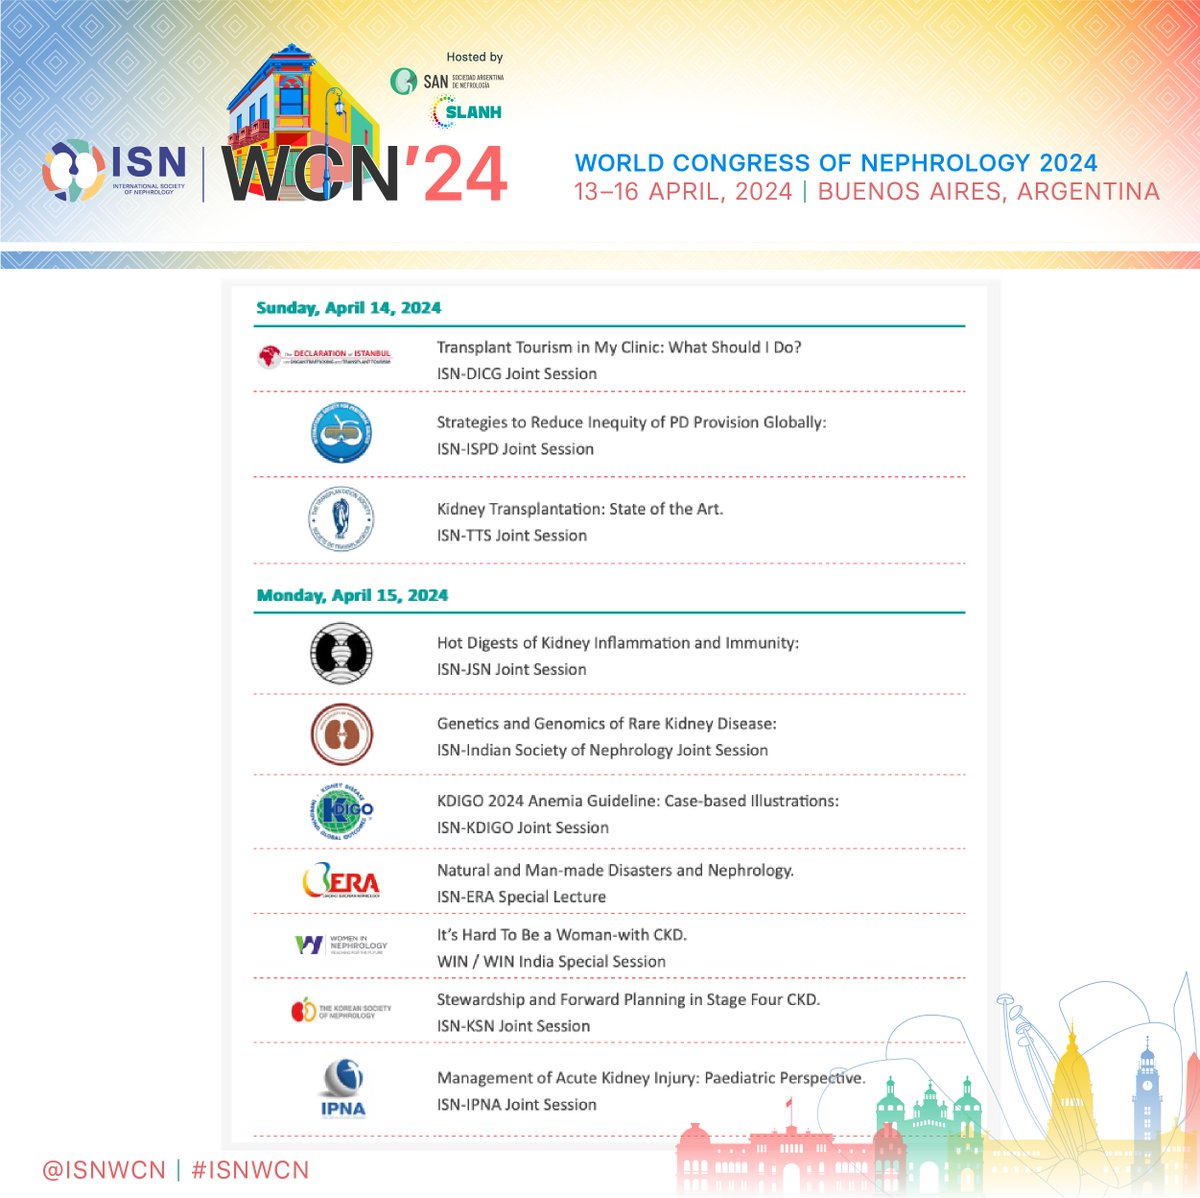 Don't miss the joint sessions during #ISNWCN @ISNWCN 🇦🇷 #womeninnephrology #PeritonealDialysis #kidneytransplant